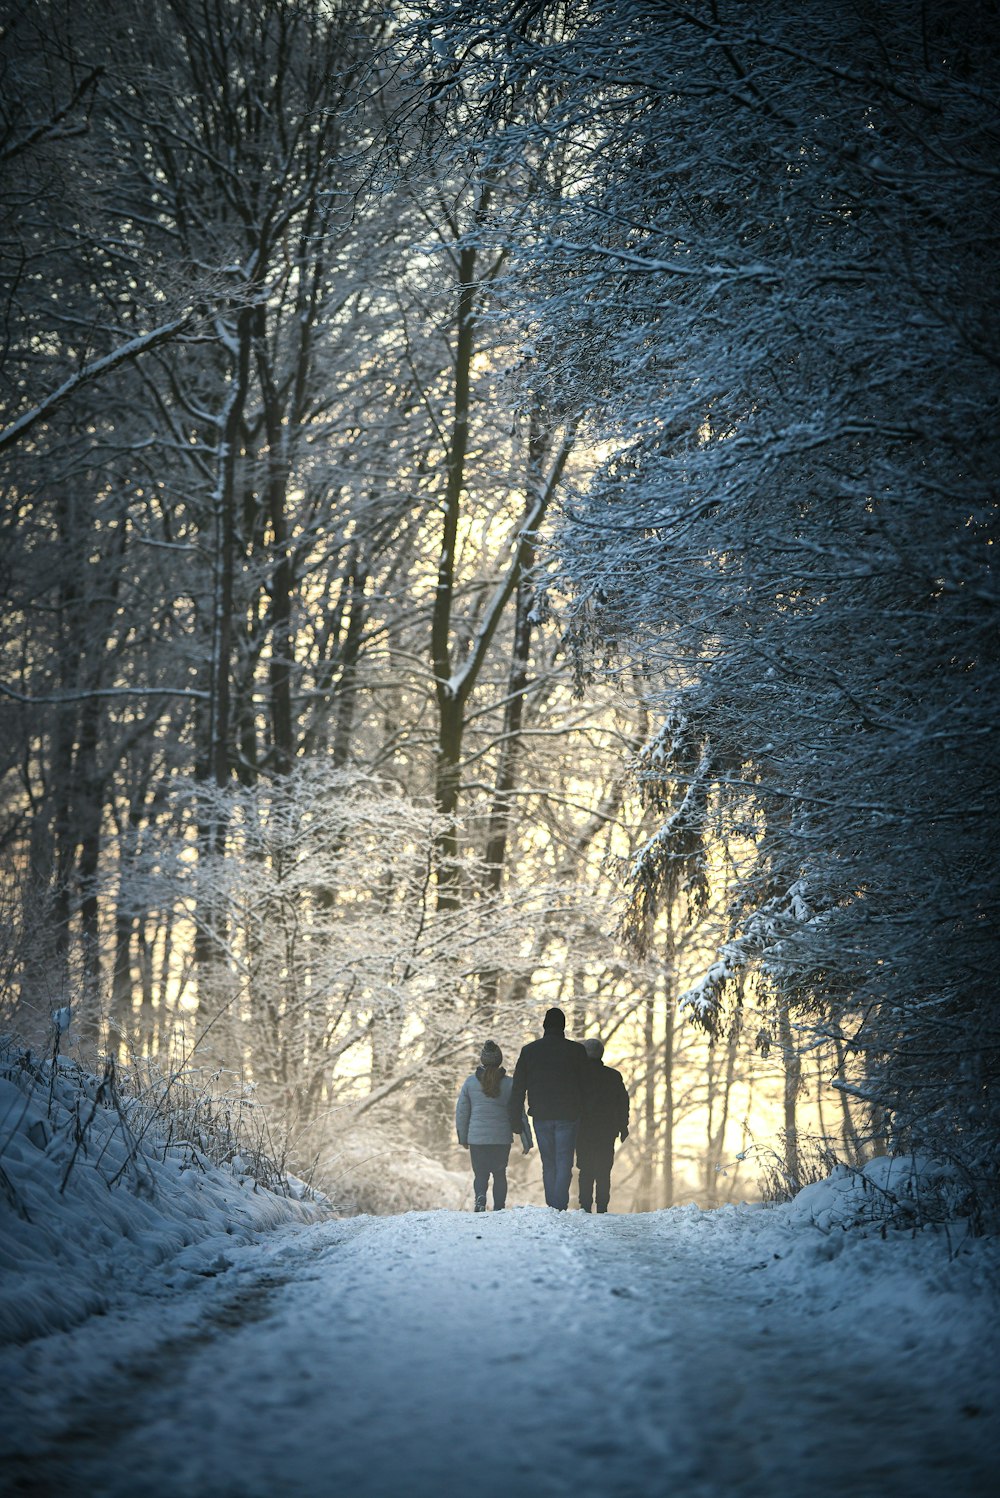 people walking on snow covered ground near trees during daytime